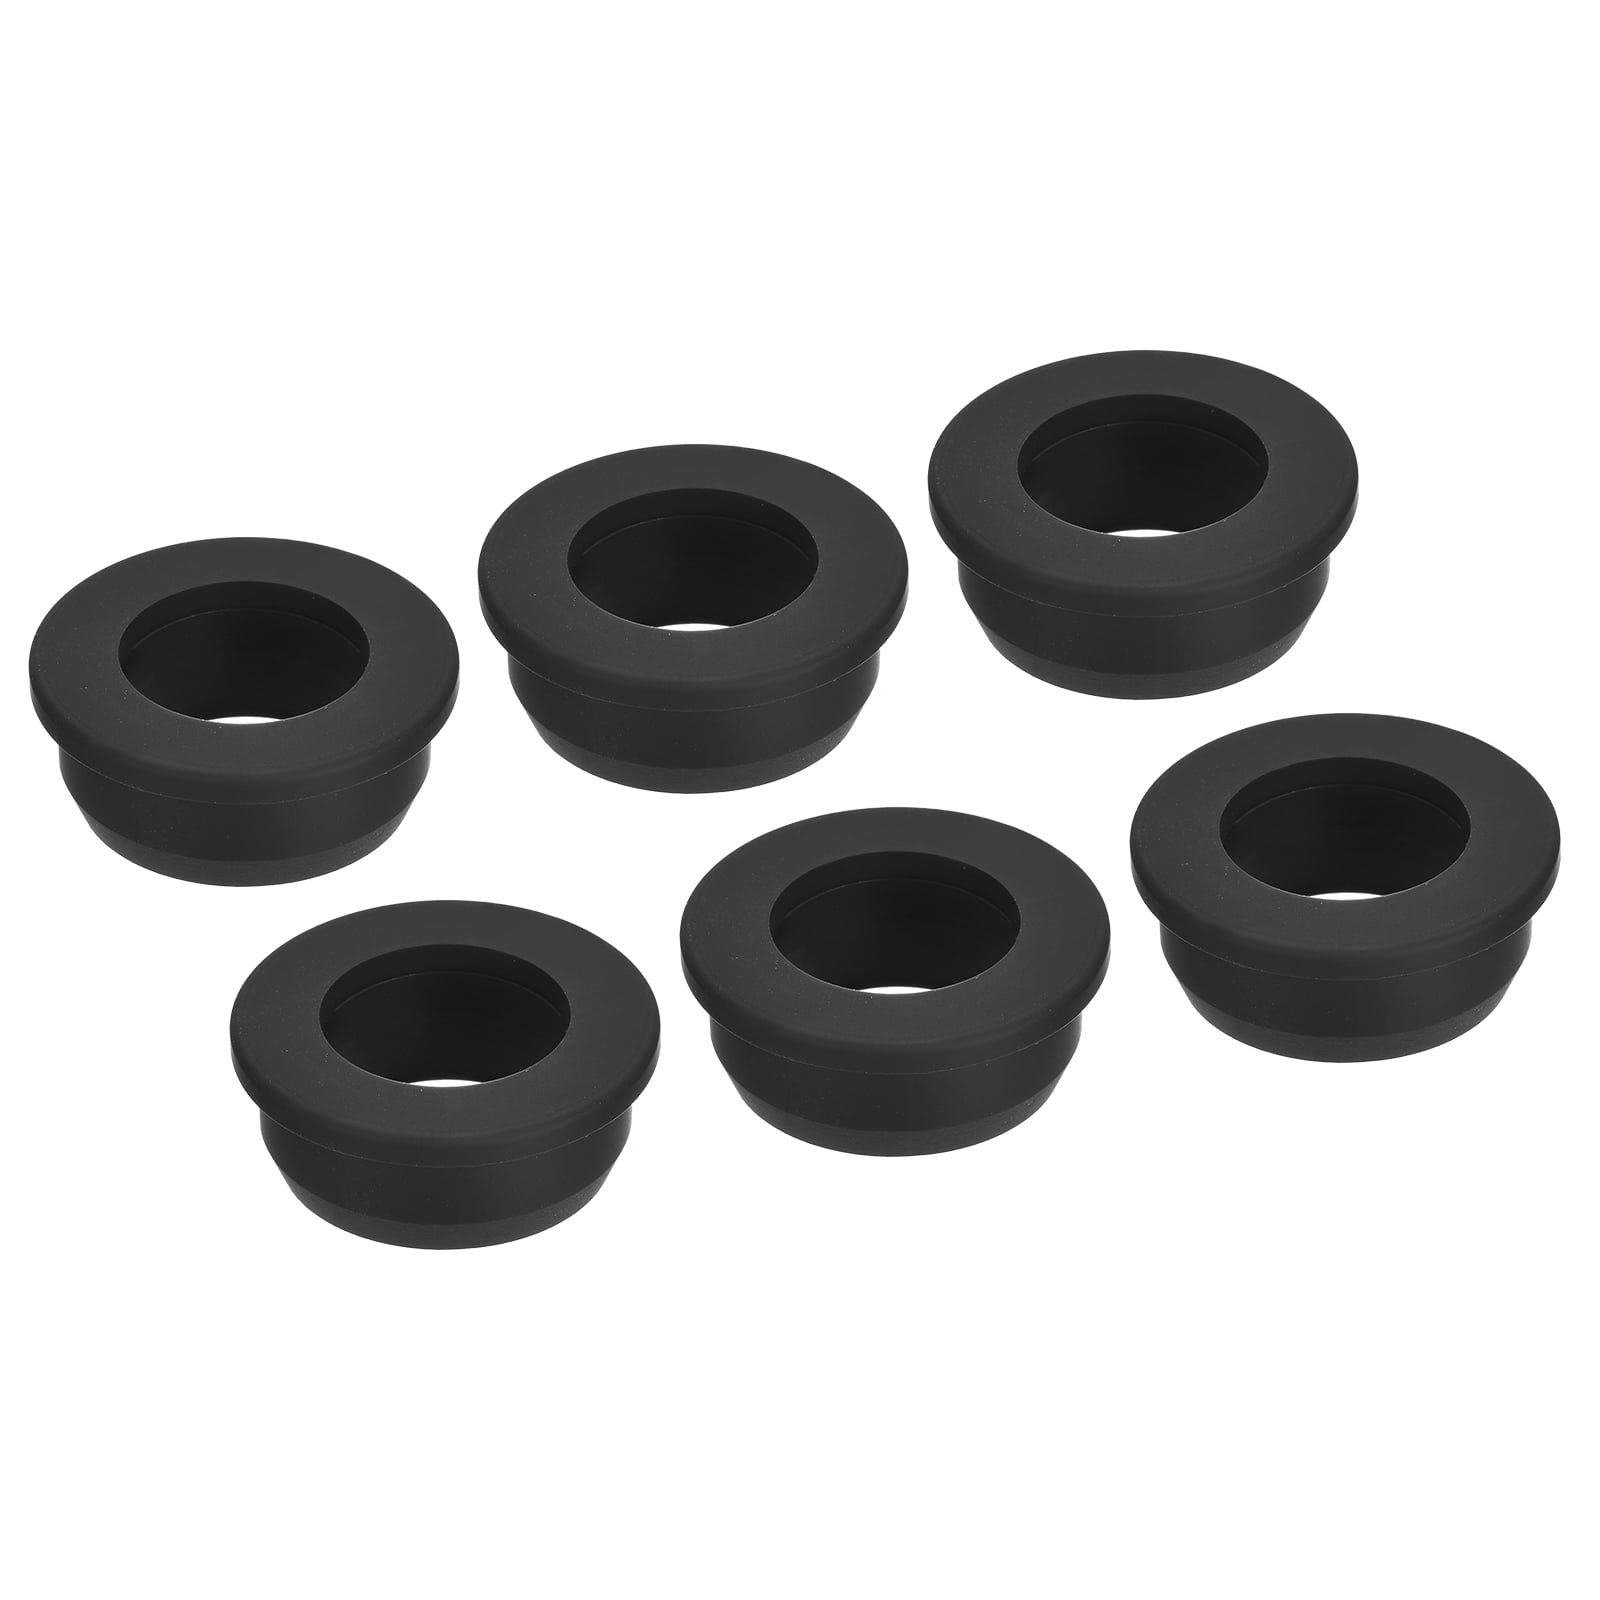 Rubber Grommet 7/8 x 1-5/8 OD x 9/16 Thick